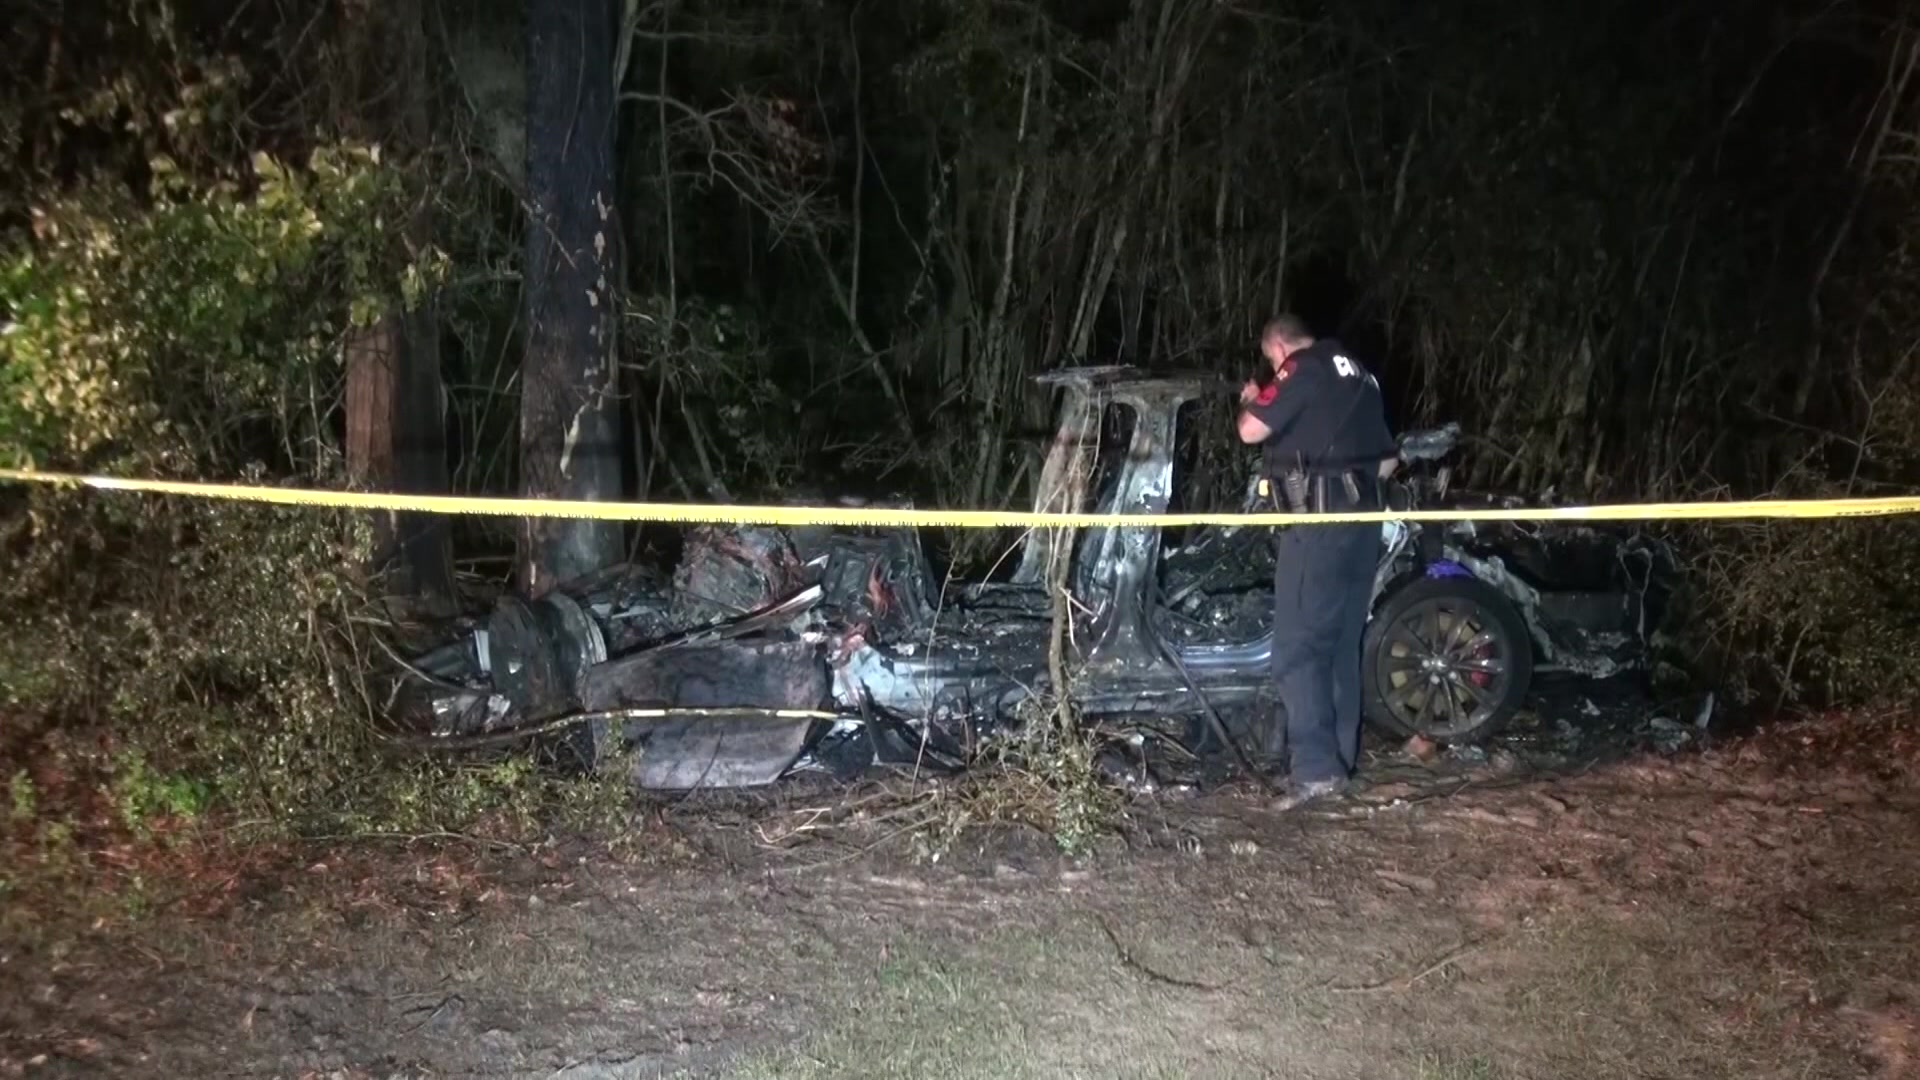 No one was driving the car': 2 men dead after fiery Tesla crash near The  Woodlands, officials say